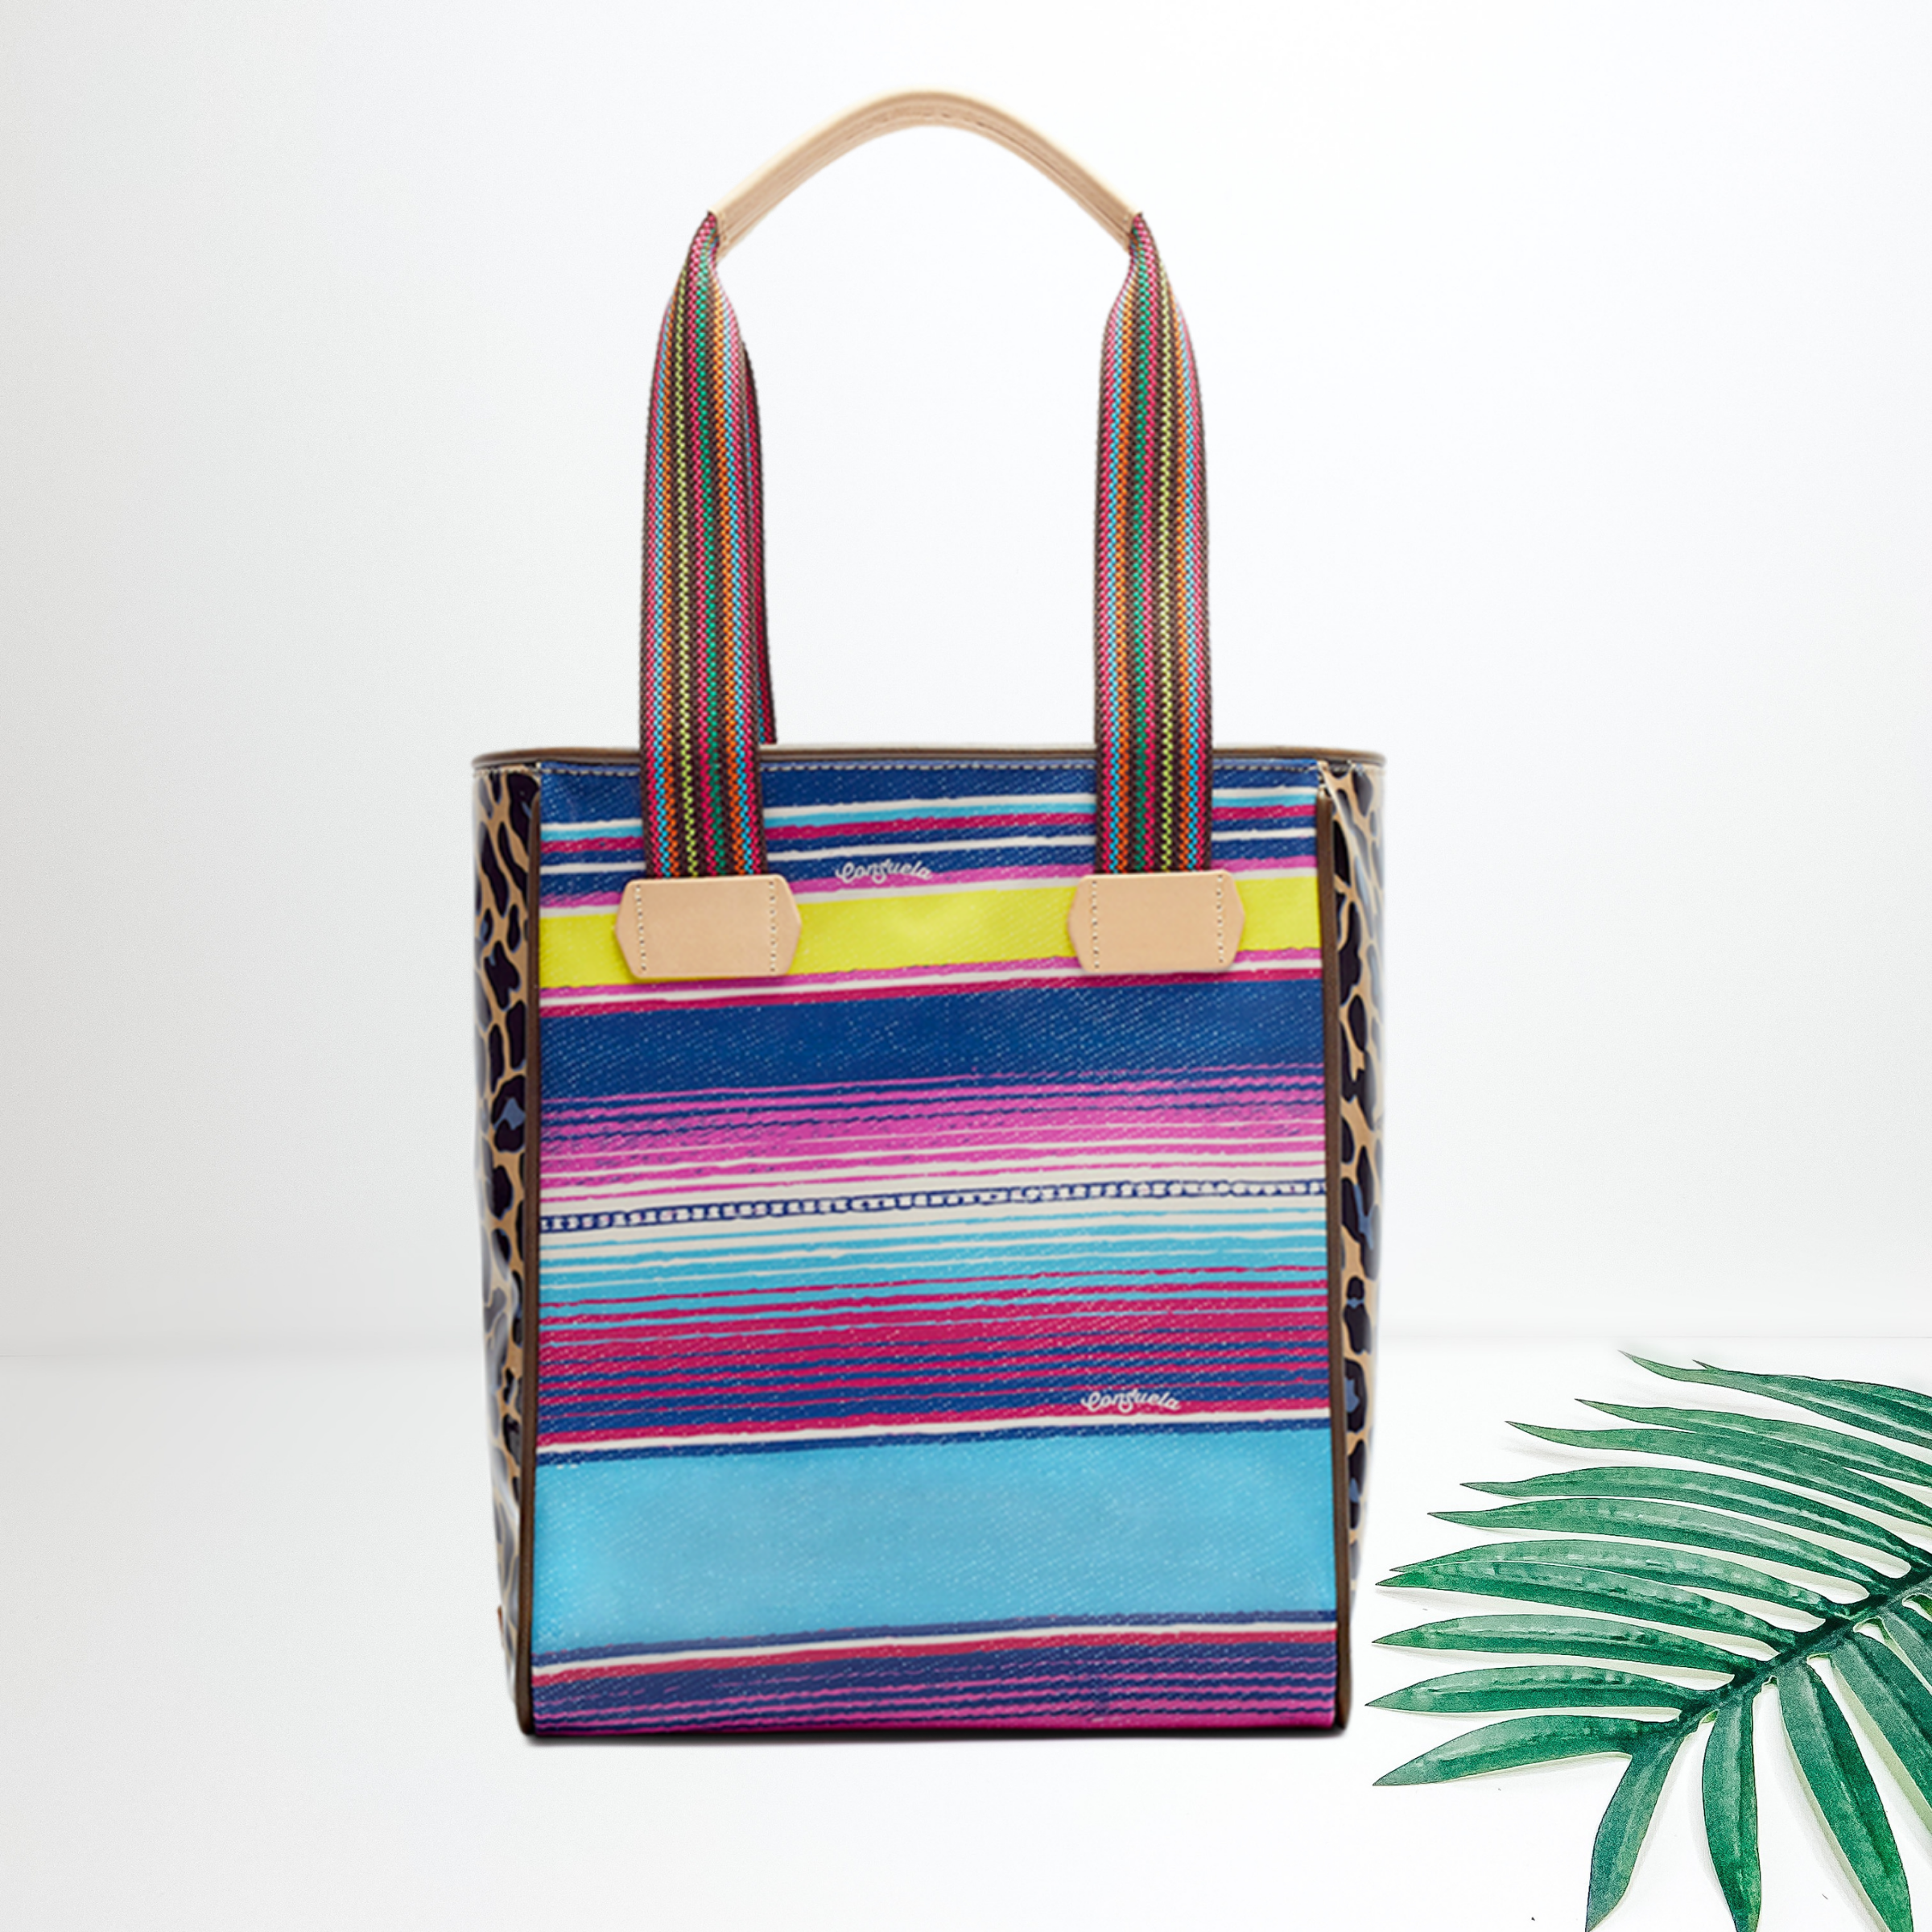 Centered in the middle of the picture is a tote bag in a multi-colored serape print. To the right of the bag is a palm leaf, all on a white background. 